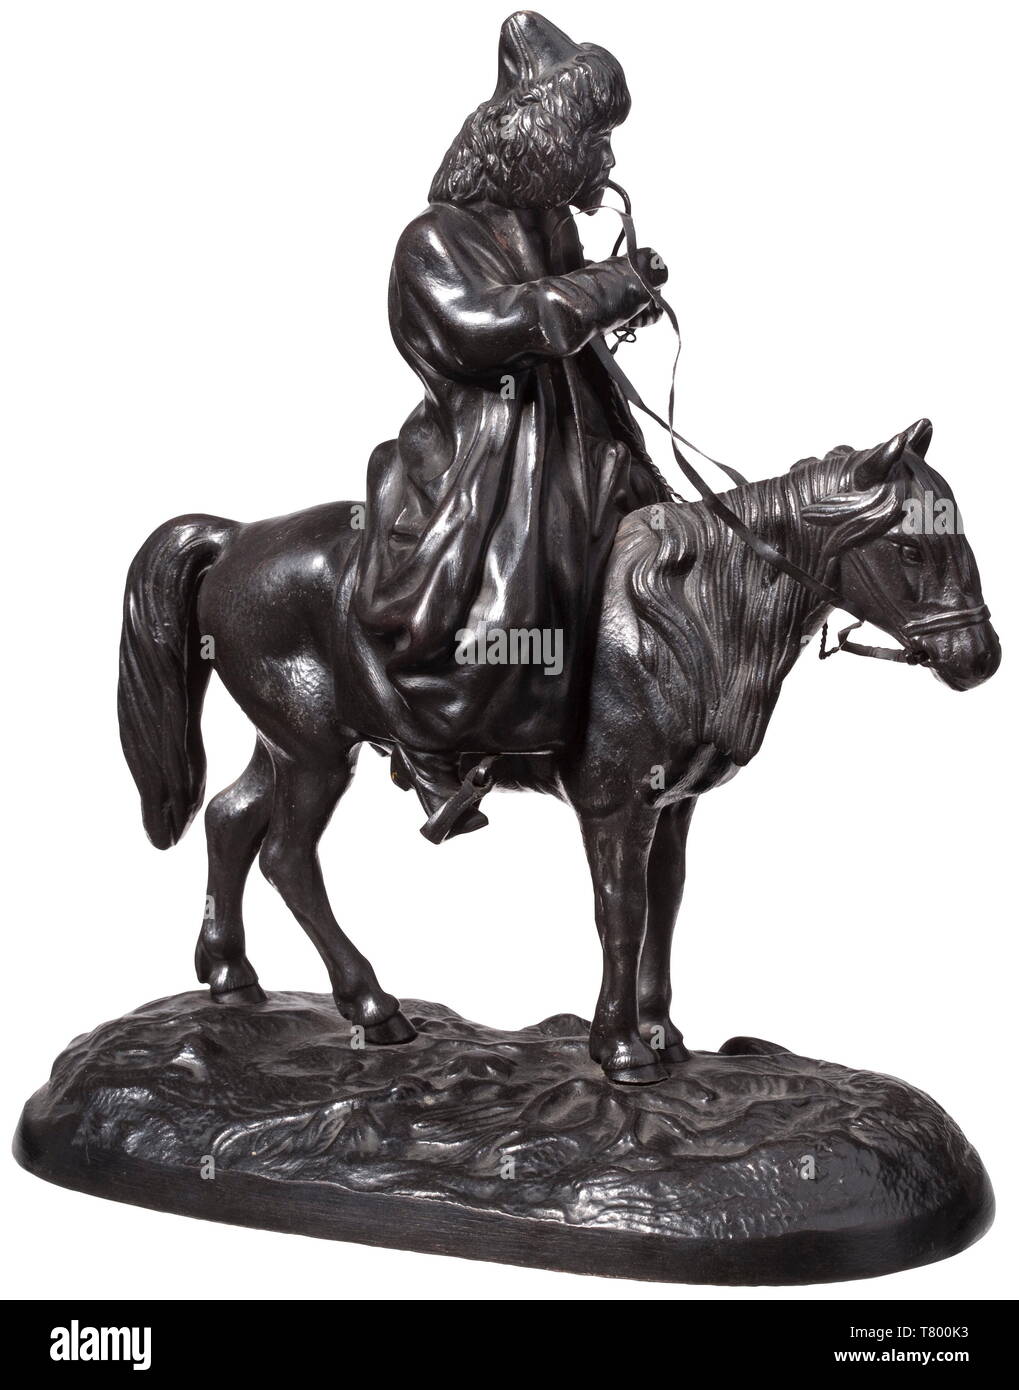 An iron sculpture - a Kyrgyz on horseback Vasily Fedorovich Torokin (1845 - 1912). A Kyrgyz on horseback, stuffing a pipe. Mounted on an oval base plate signed in Cyrillic on the side, and with the caster´s stamp 'A.L. Ober' and the tsarist double-headed eagle on the bottom. 19 x 22 cm historic, historical, 19th century, Additional-Rights-Clearance-Info-Not-Available Stock Photo